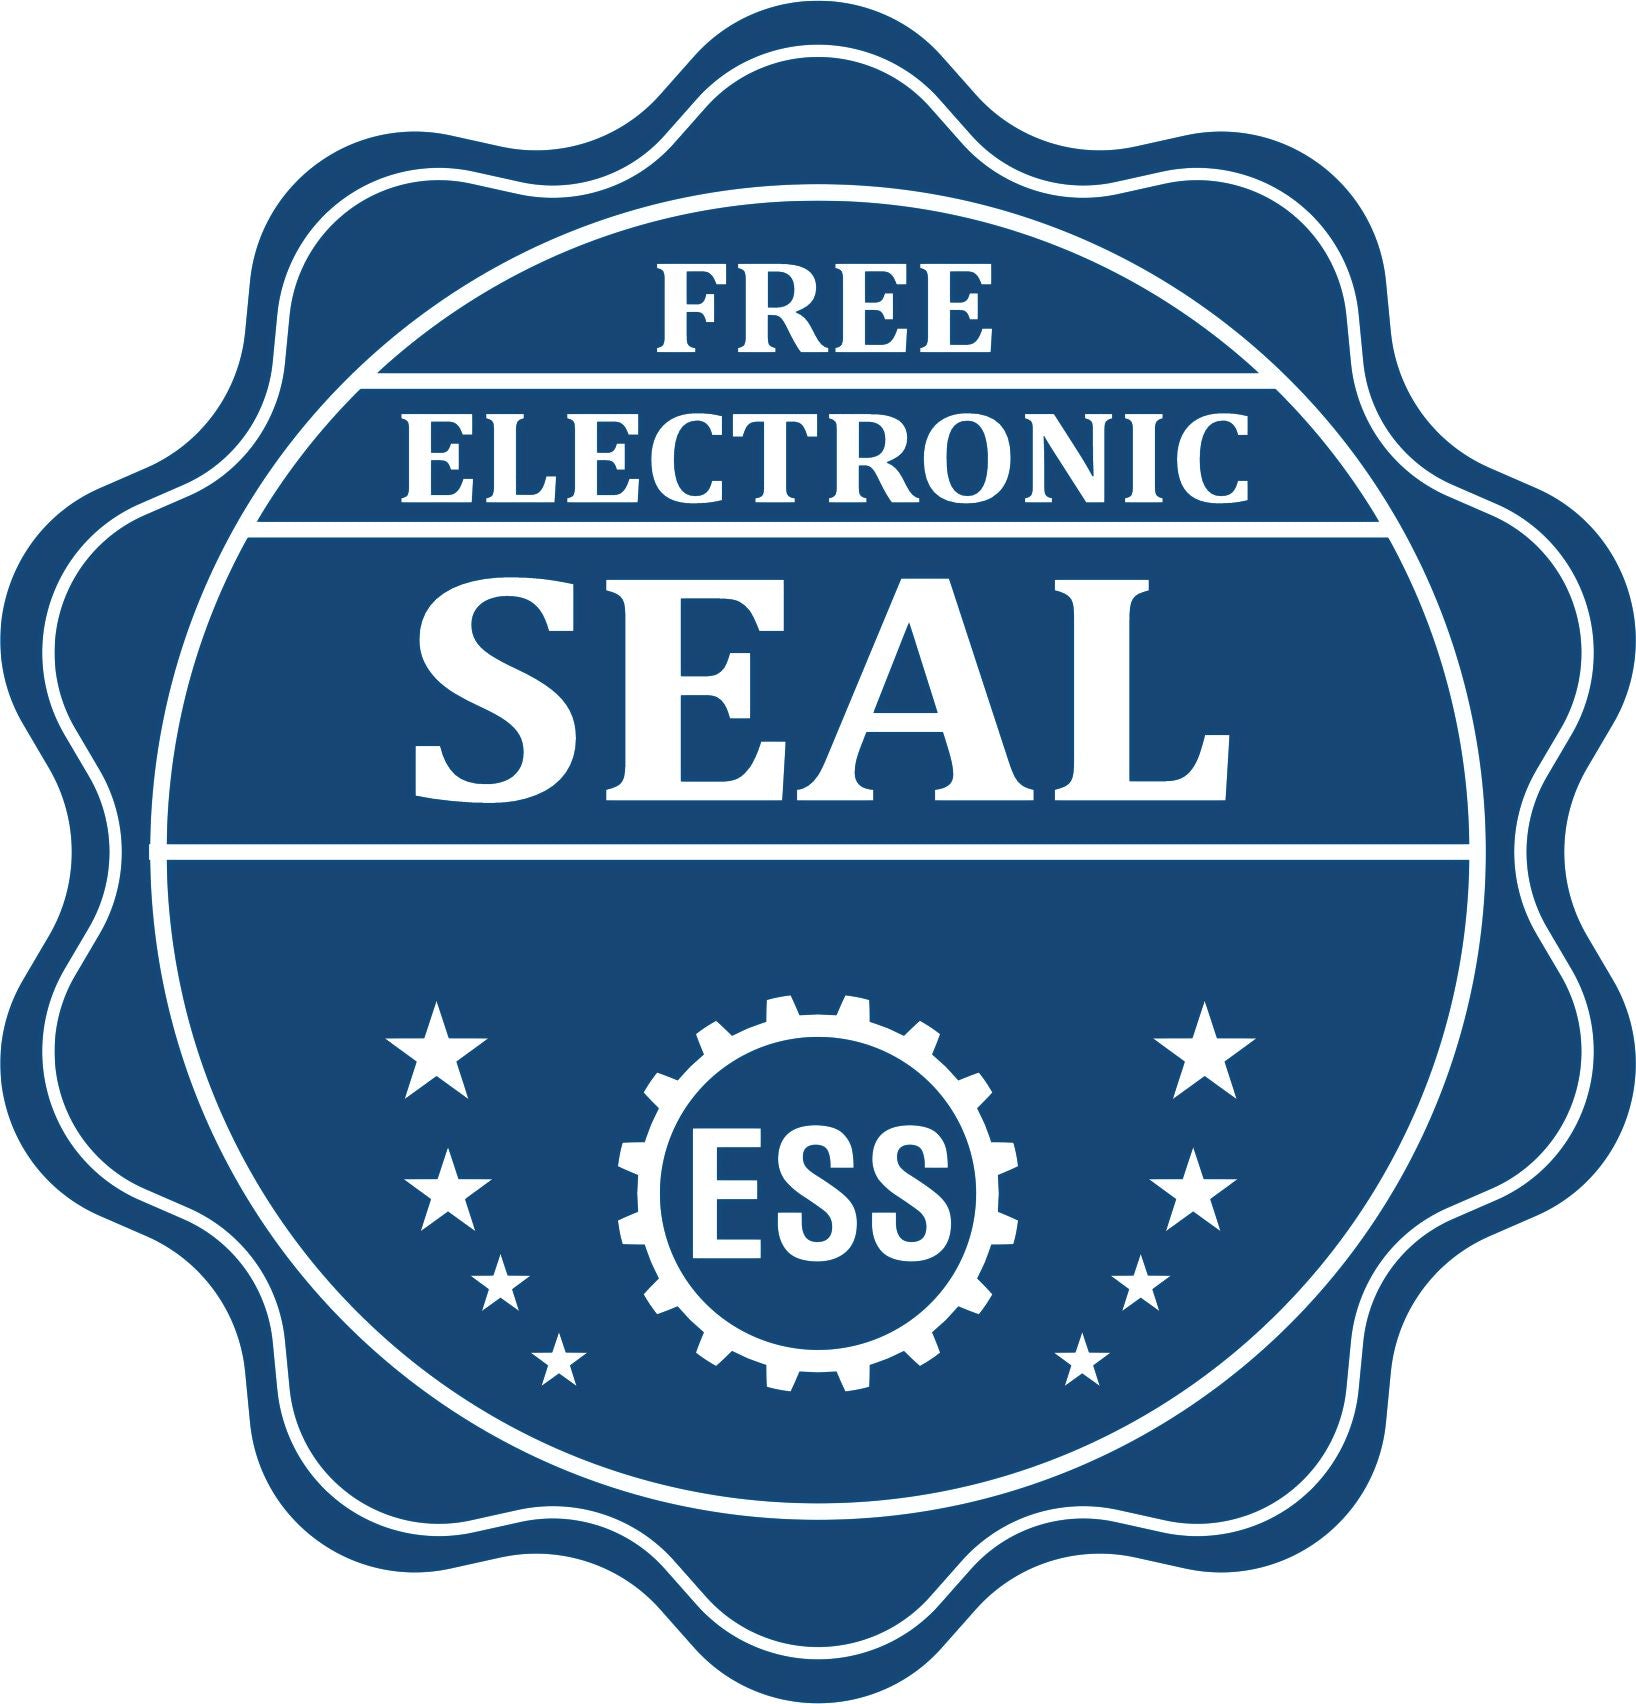 A badge showing a free electronic seal for the Slim Pre-Inked Michigan Professional Engineer Seal Stamp with stars and the ESS gear on the emblem.